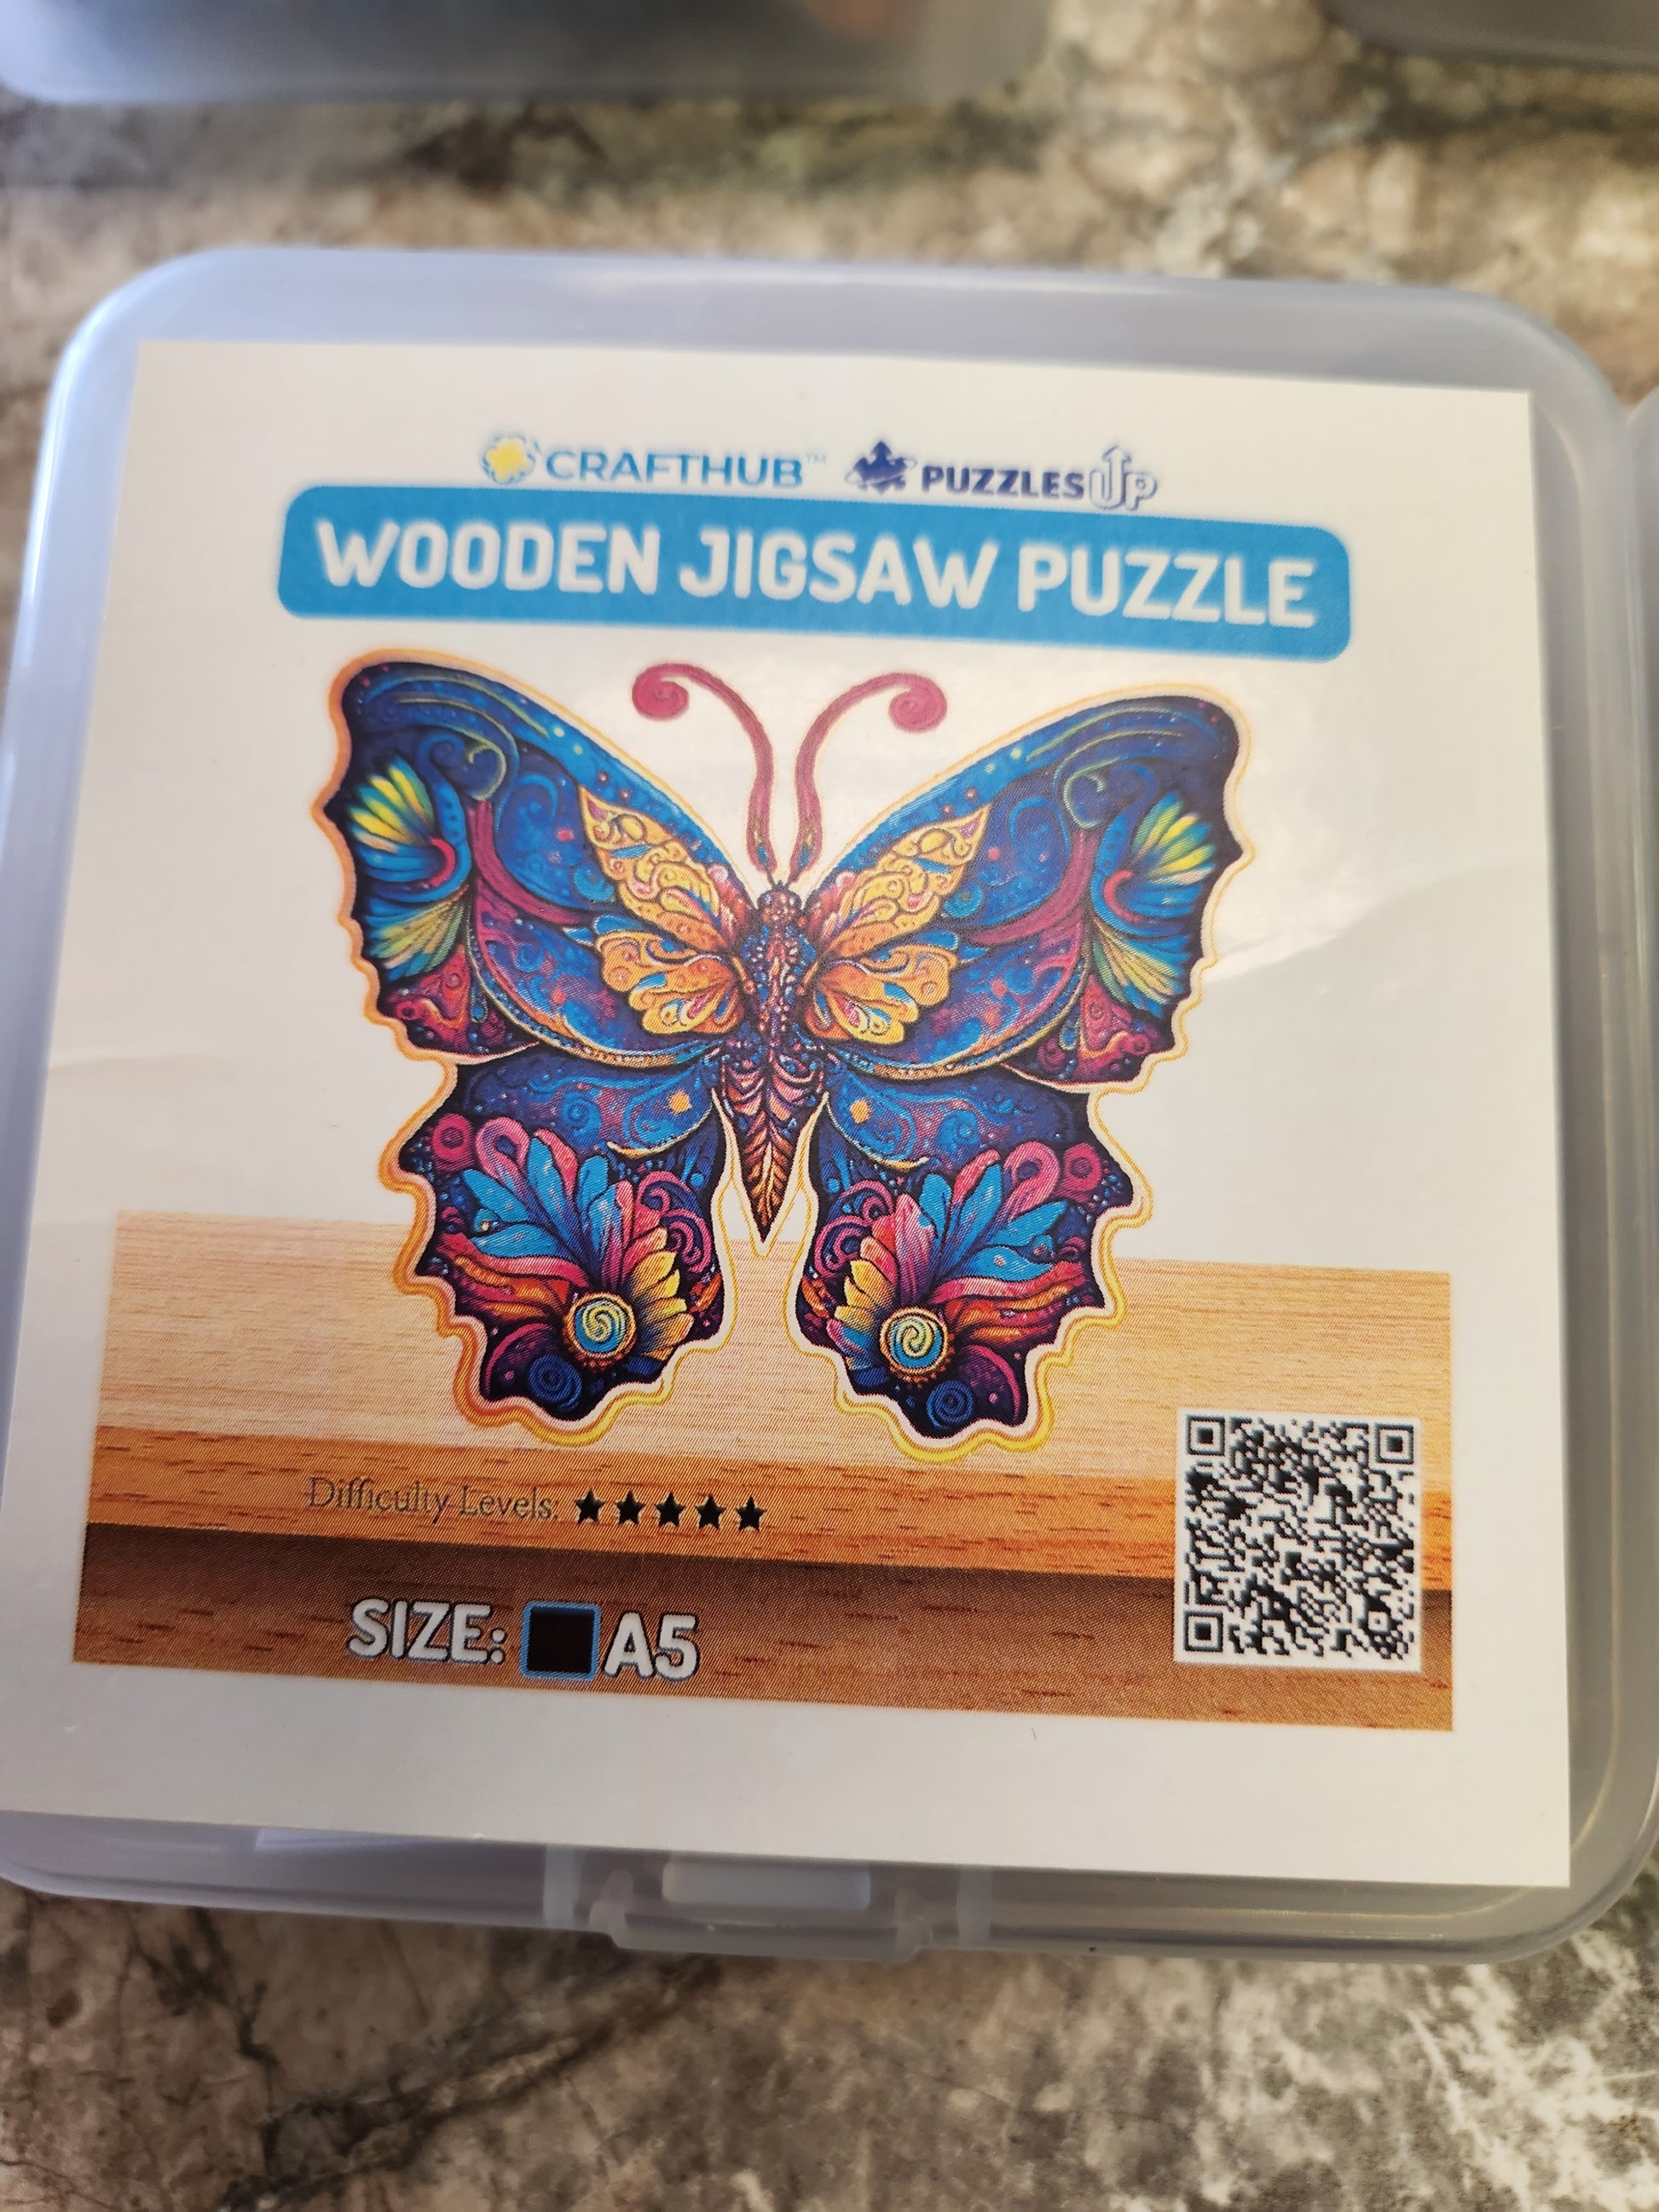 Craft-Hub Wooden Jigsaw Puzzles - Dog, Turtle, Butterfly - Dead Tree Dreams Bookstore